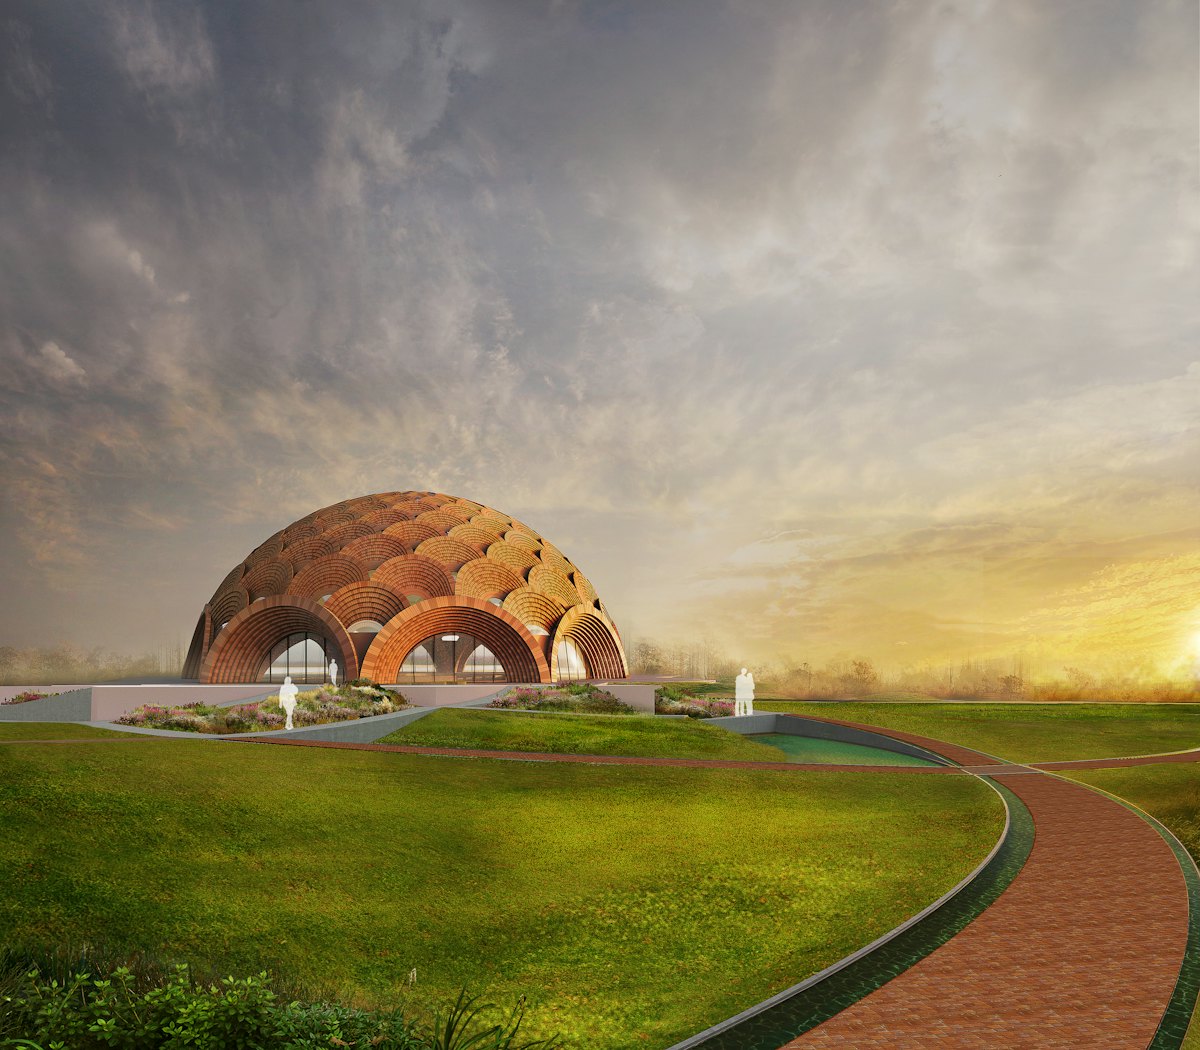 The design for the new Baha’i House of Worship in Bihar Sharif unveiled by National Spiritual Assembly of the Baha’is of India.